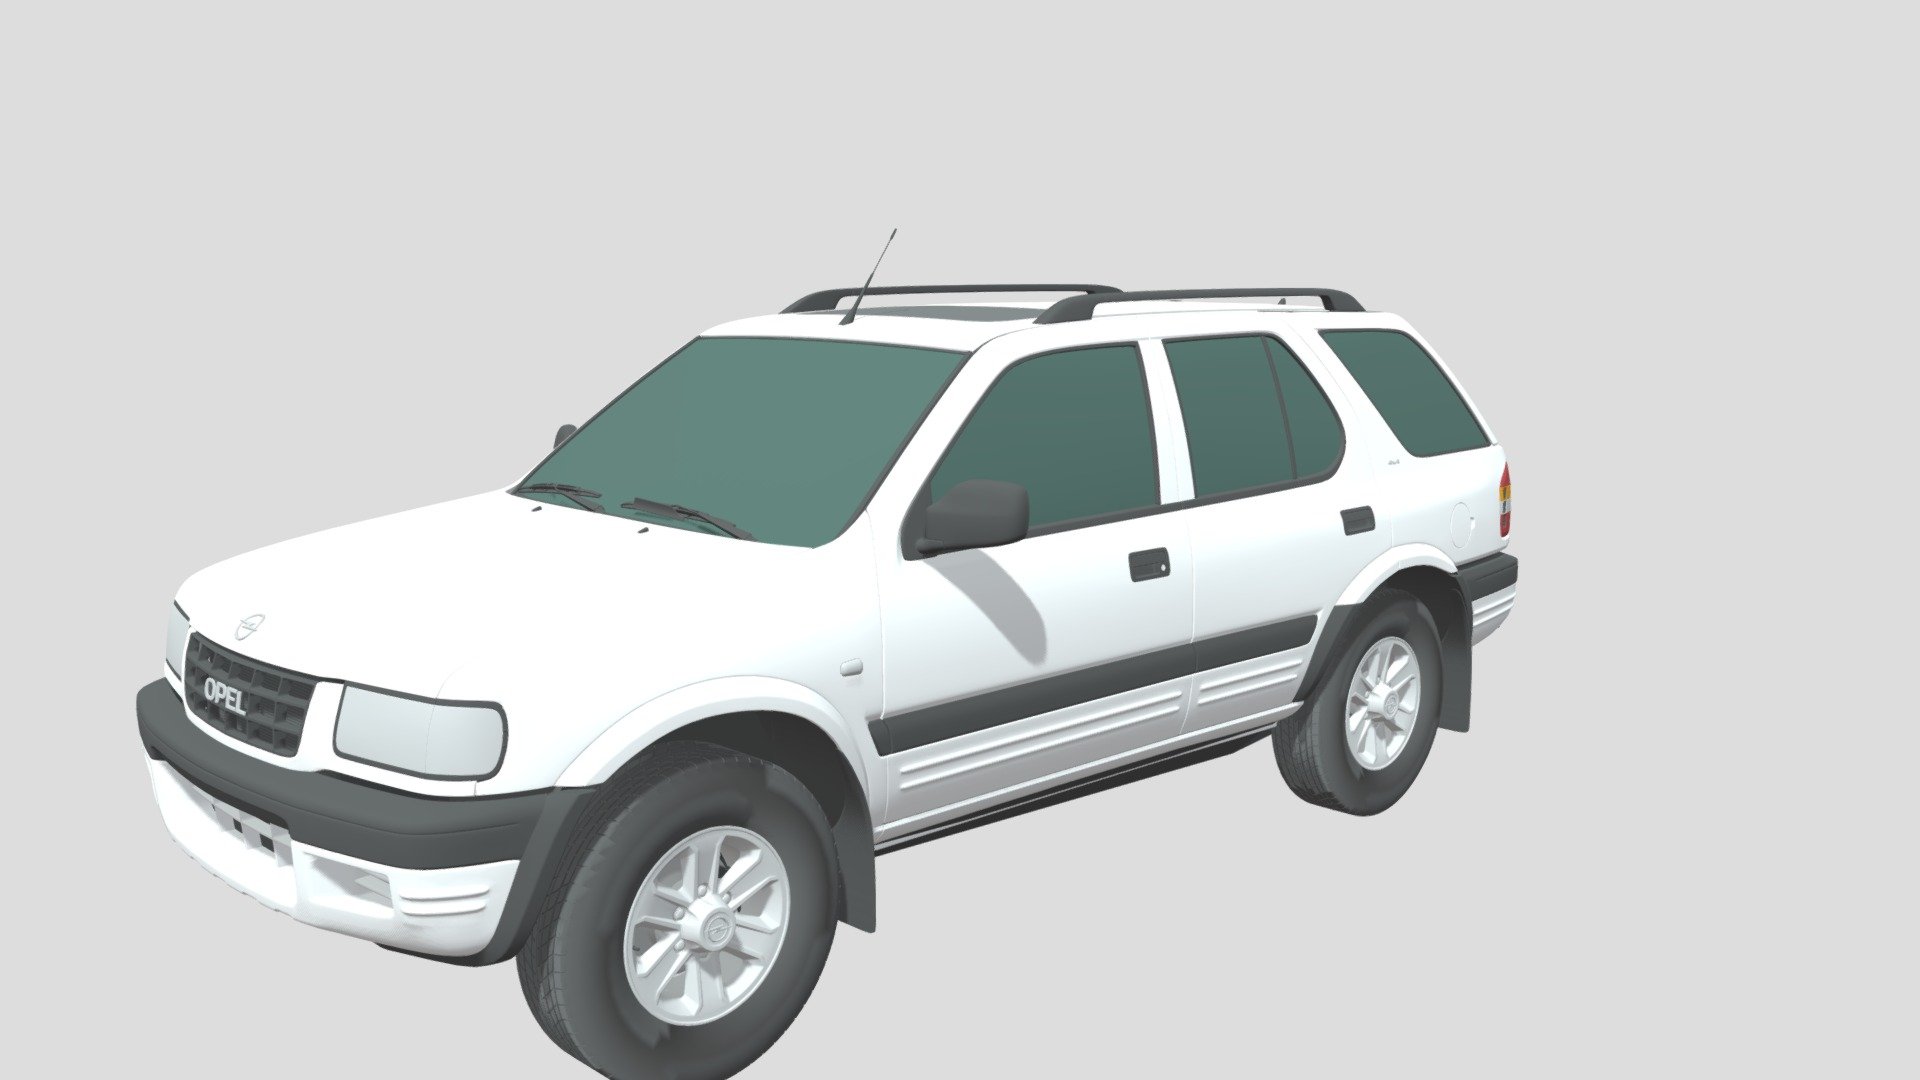 Introducing our stunning photorealistic 3D model of the Opel Frontera (Type B) (1998) car, a true masterpiece of digital craftsmanship that will elevate your projects to the next level. This meticulously crafted model captures every curve, detail, and essence of a real Opel Frontera (Type B) (1998) car, providing you with unparalleled realism and versatility for your creative endeavors.

Our photorealistic 3D model of the Opel Frontera (Type B) (1998) car is a testament to precision and attention to detail. Each contour, from the sleek body lines to the intricacies of the headlights and tail lights, has been painstakingly recreated to mirror the elegance and realism of a genuine Opel Frontera (Type B) (1998) automobile. Whether you're an automotive designer, a video game developer, or a filmmaker, this 3D model will bring your visions to life with exceptional fidelity 3d model